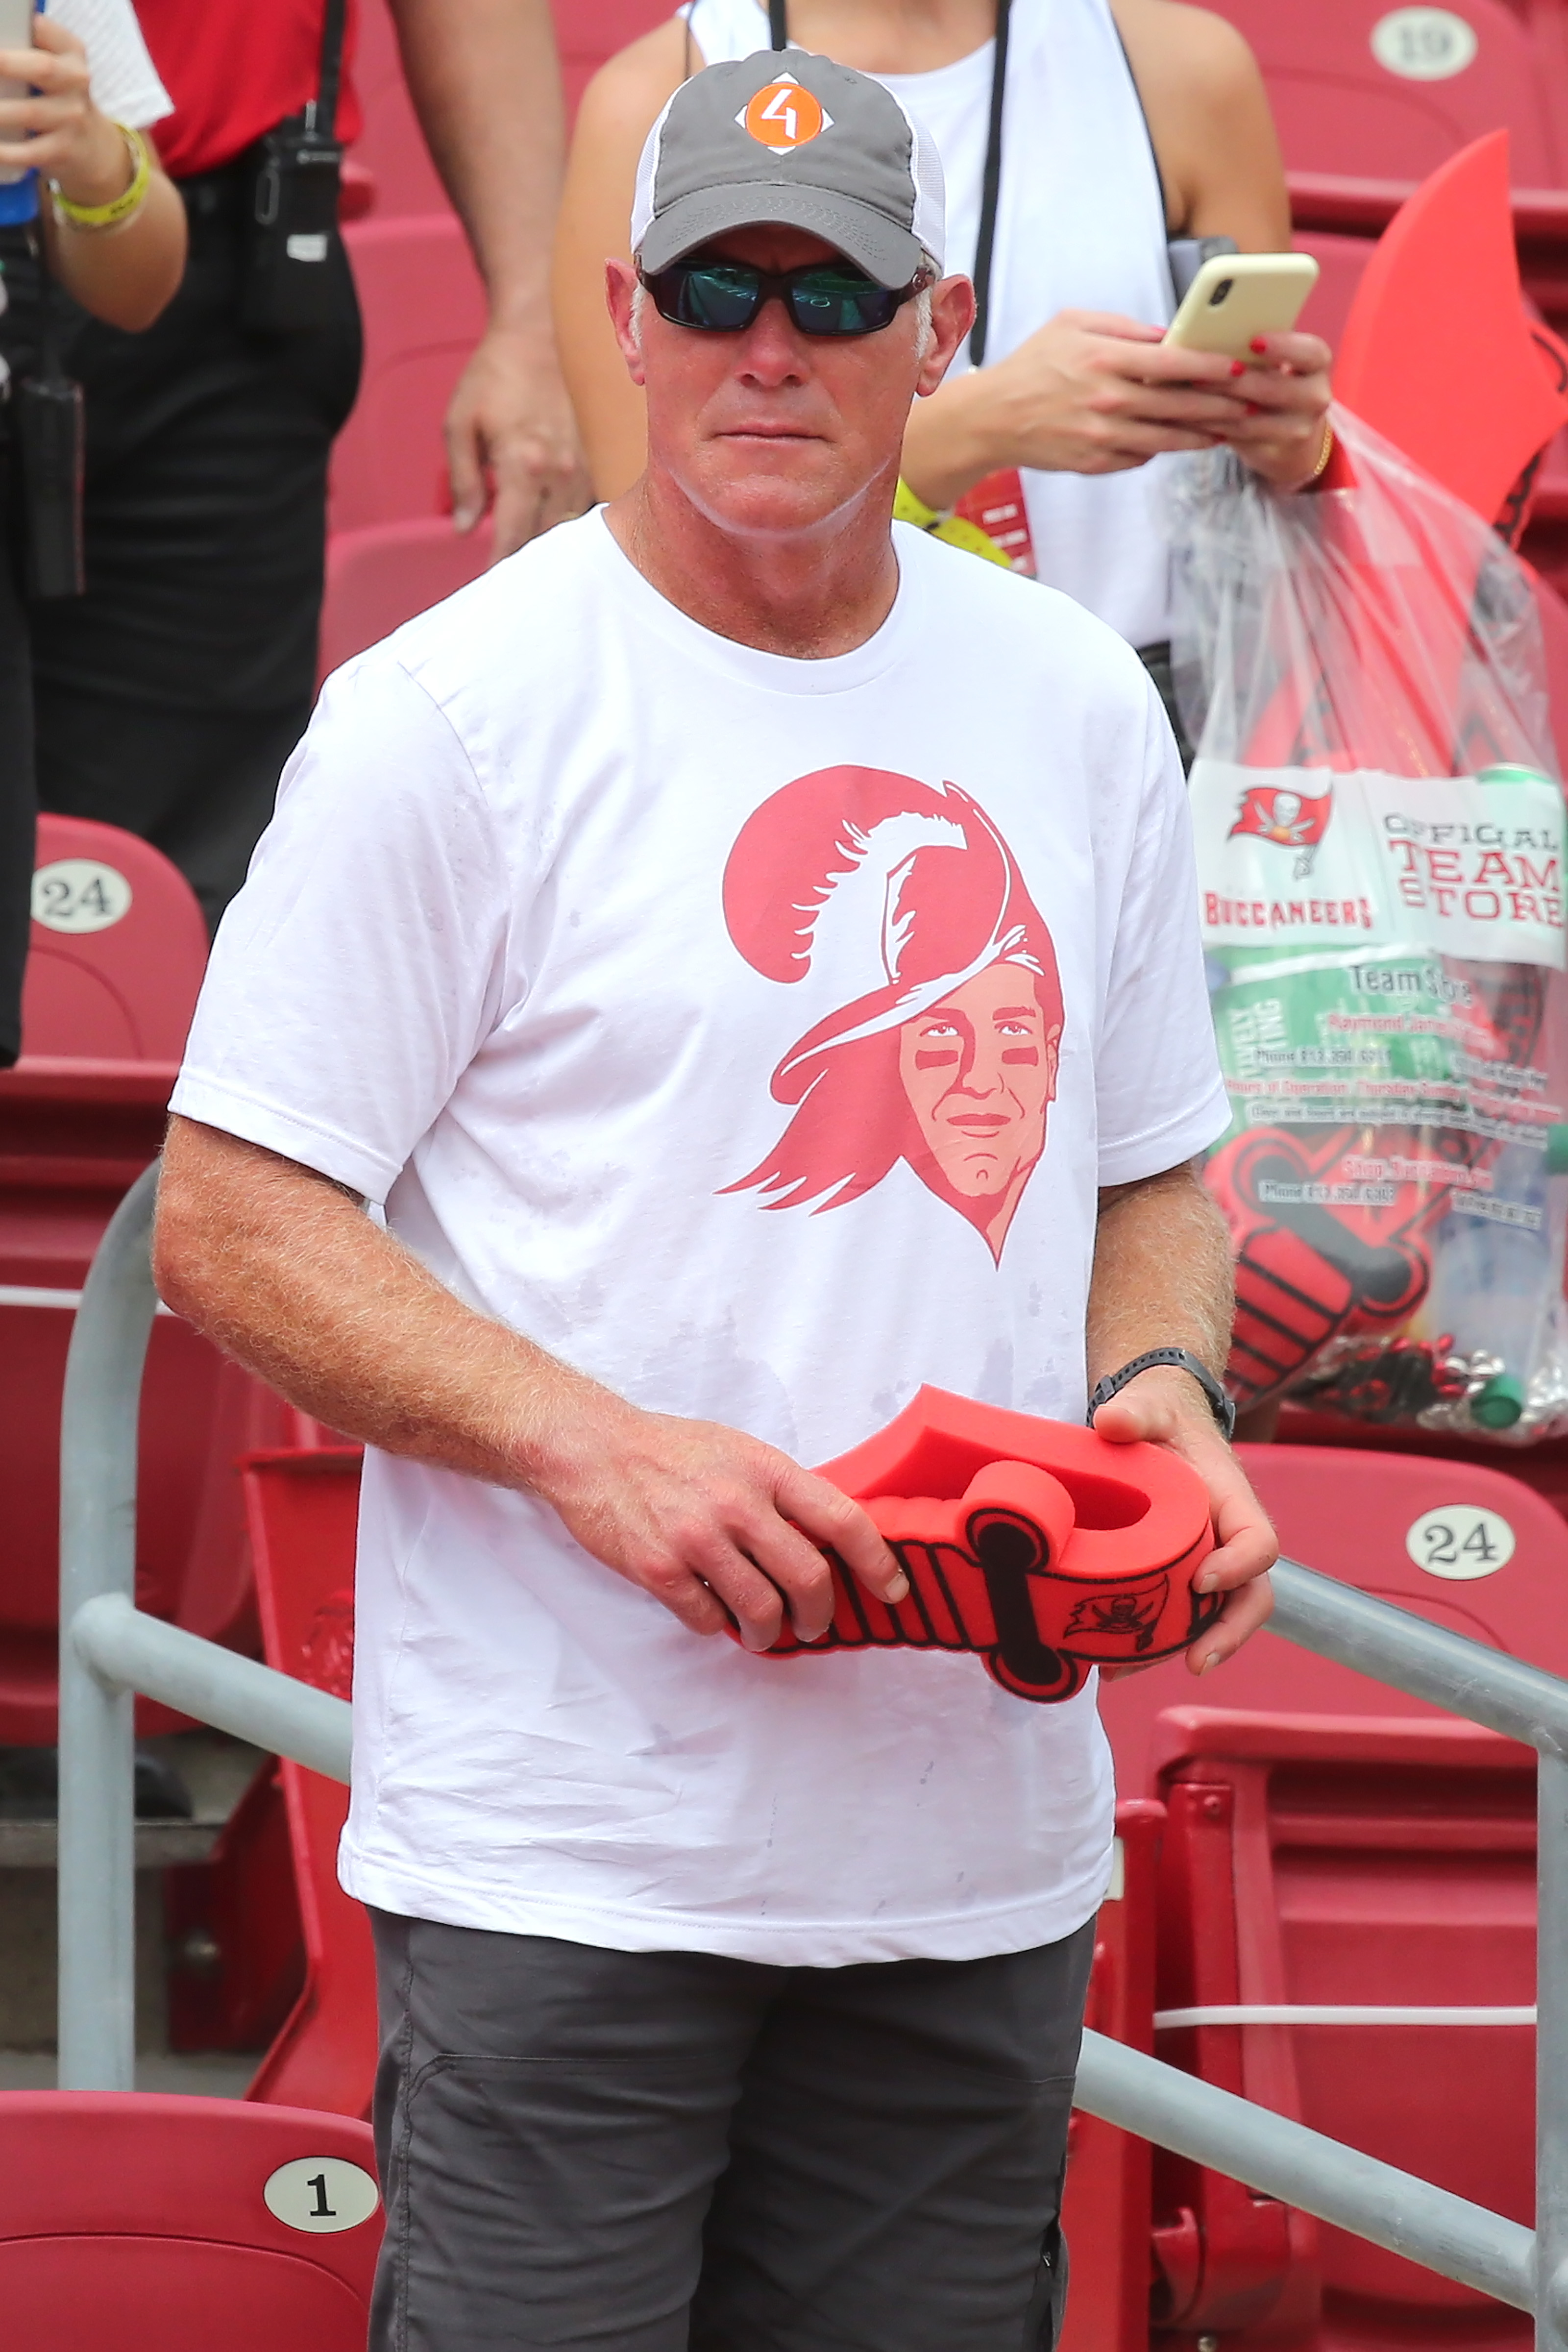 Brett in a  cap and white T-shirt with graphic, holding a red object, standing at a sporting event